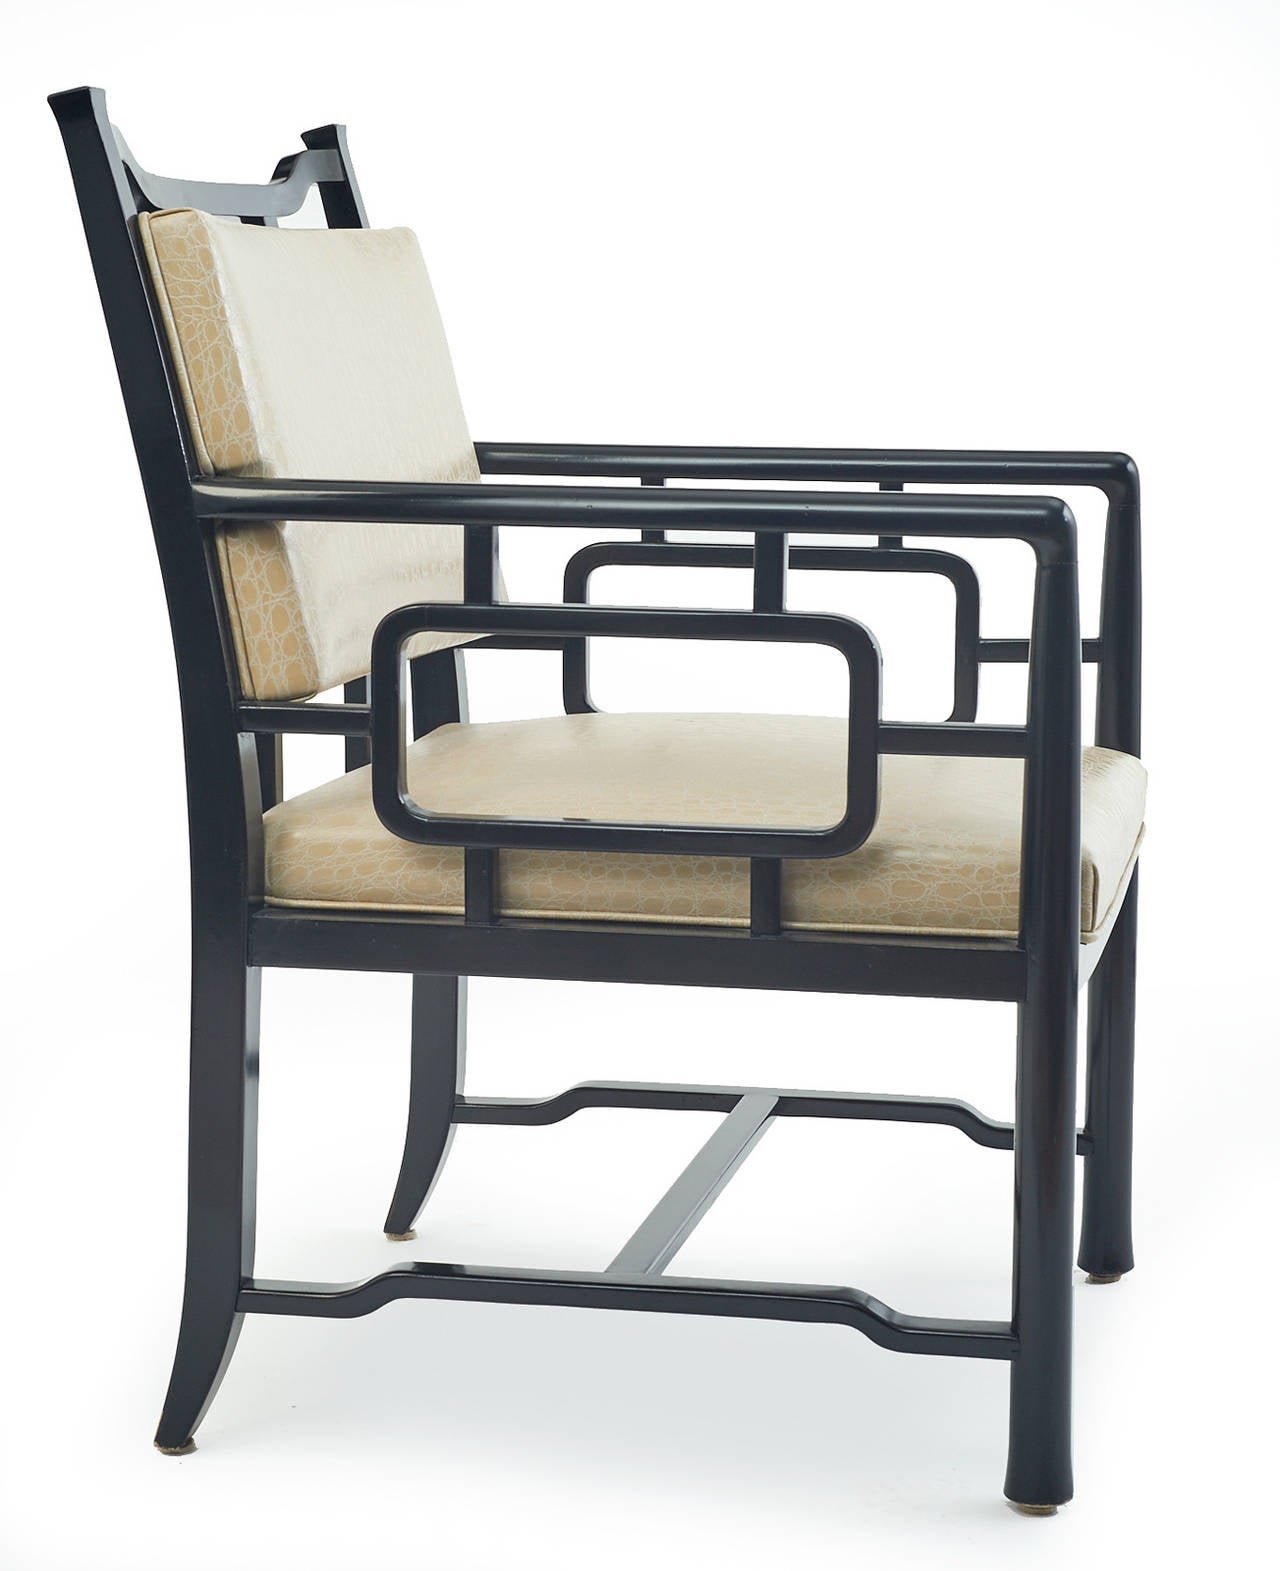 Mid-20th Century Asian Inspired Chairs by Paul Laszlo, circa 1945